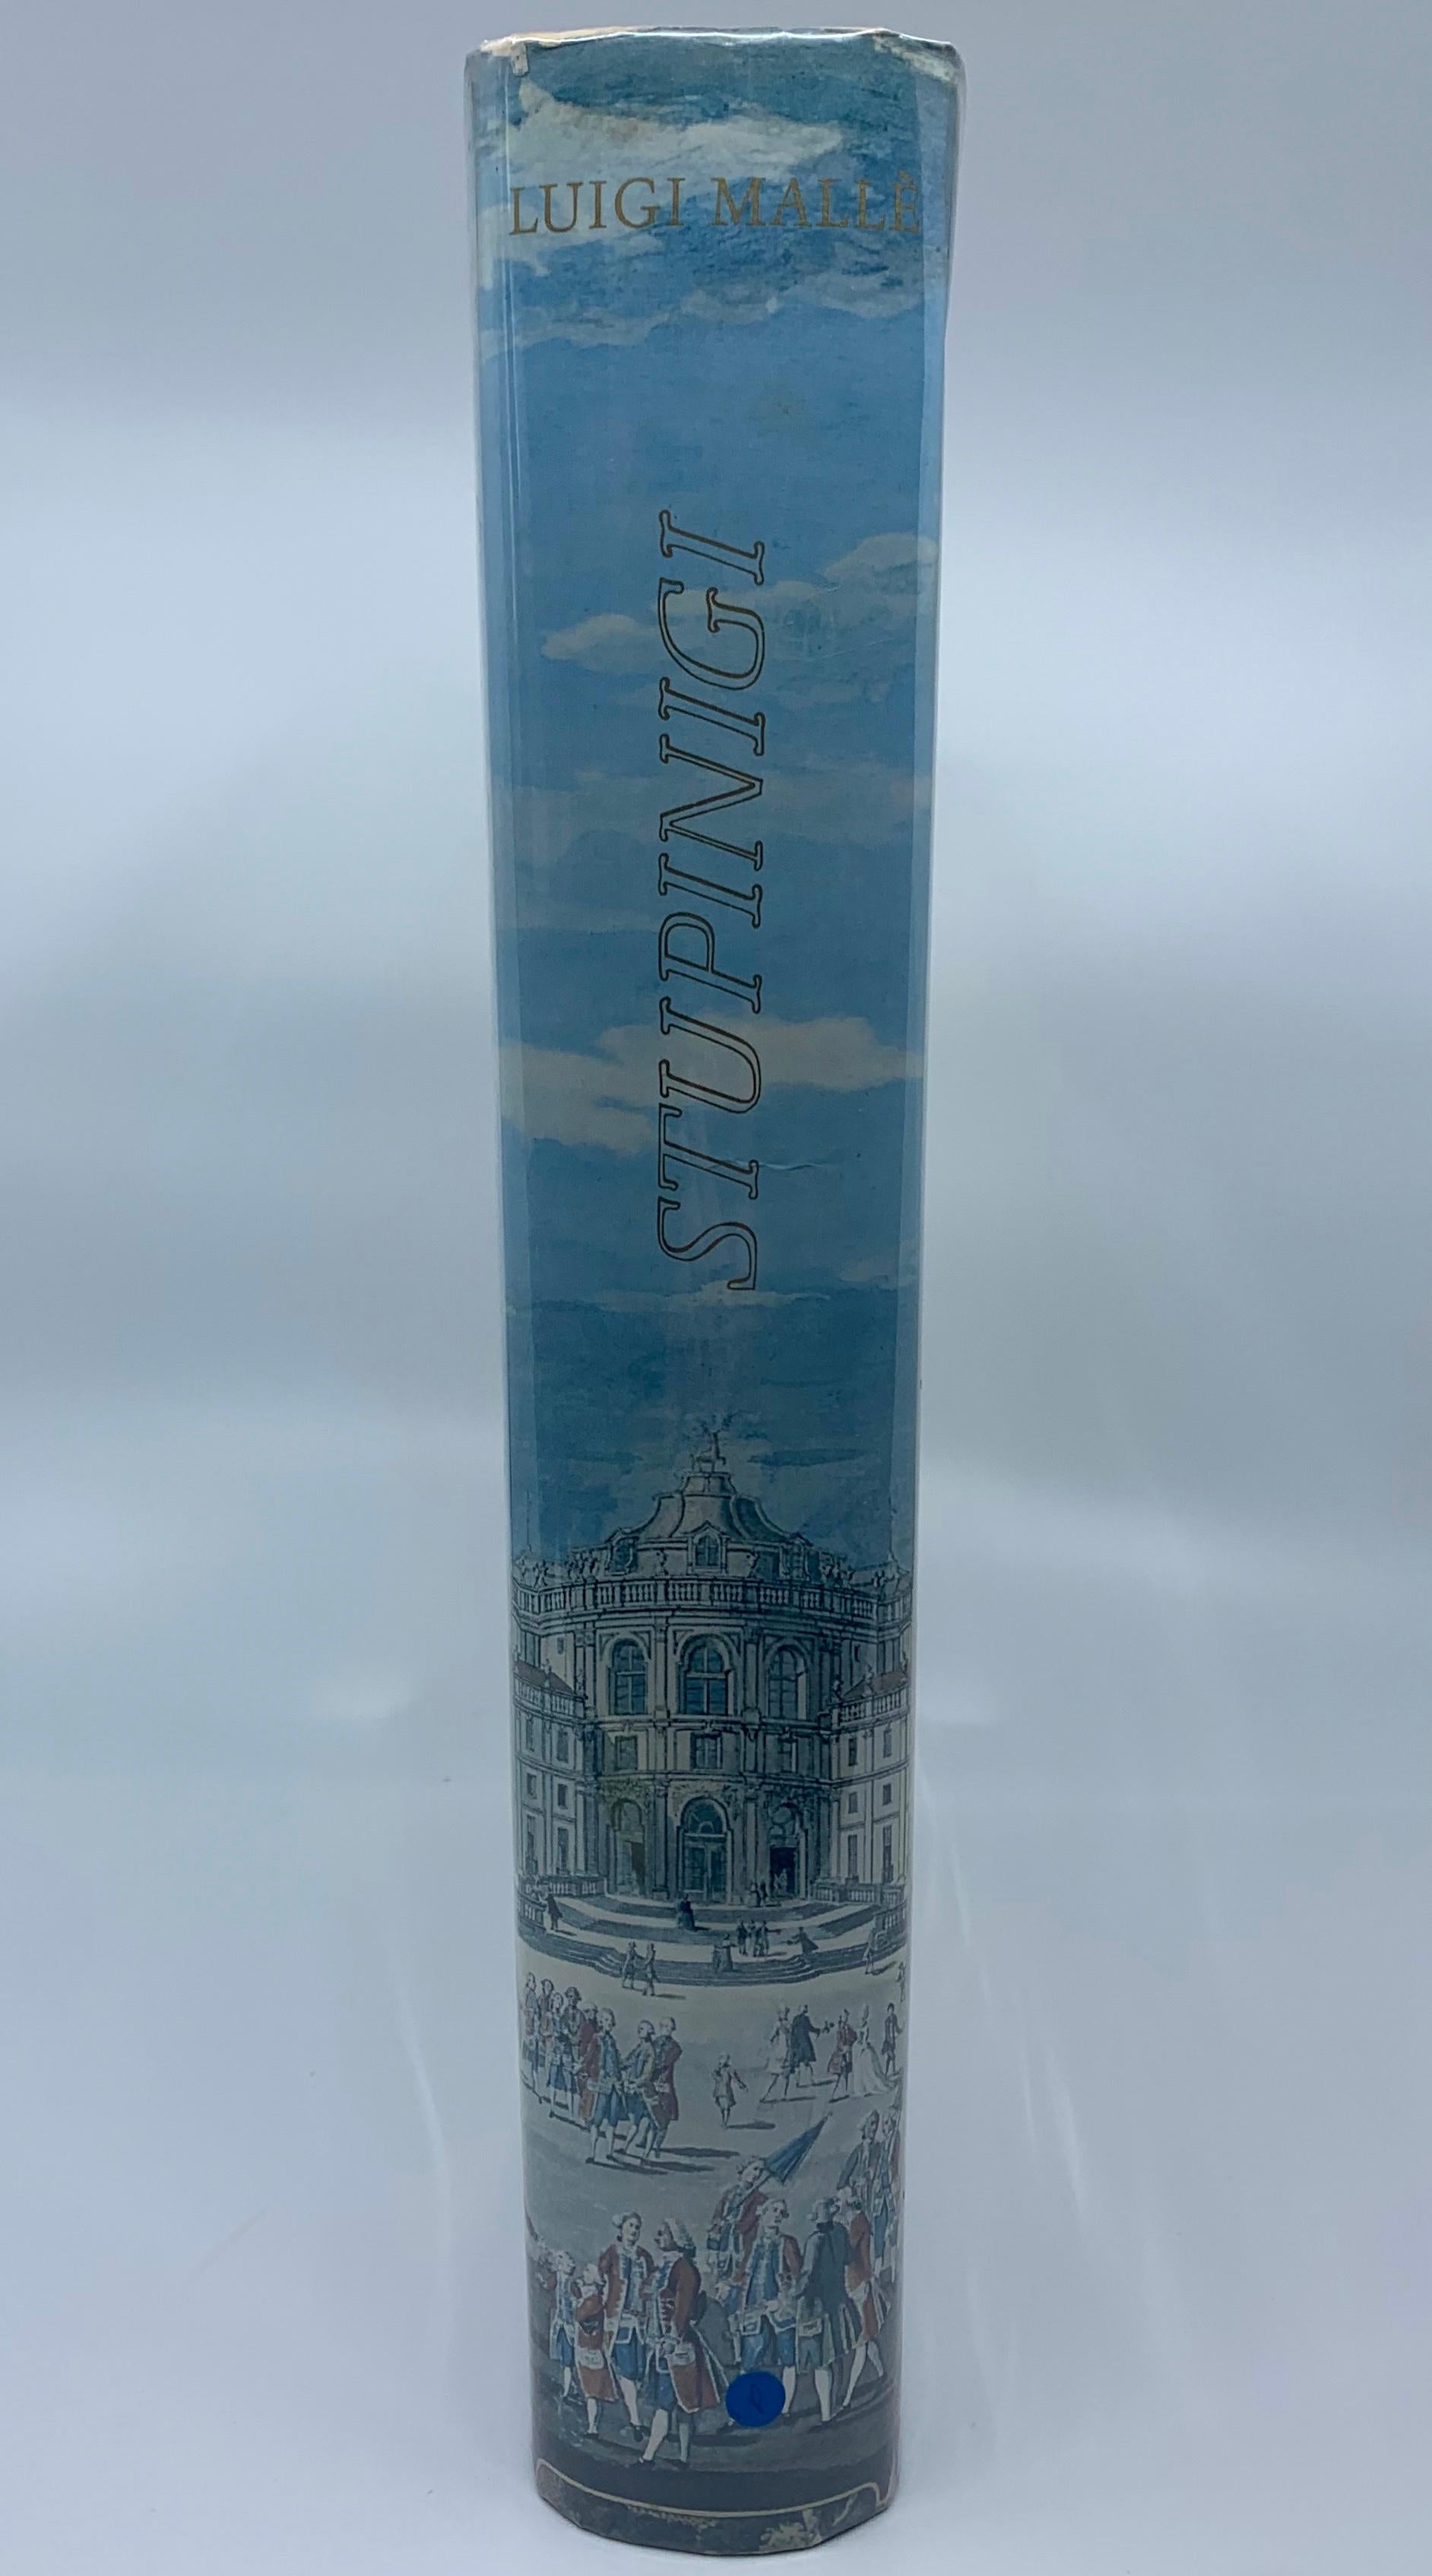 Stupinigi, a masterpiece of 17th century Europe between Baroque and classicism. The story and photos of the magnificent hunting palace of the kings of Italy. First edition hardcover, blue cloth color pictorial original dust jacket, 544 pp., 546 BW